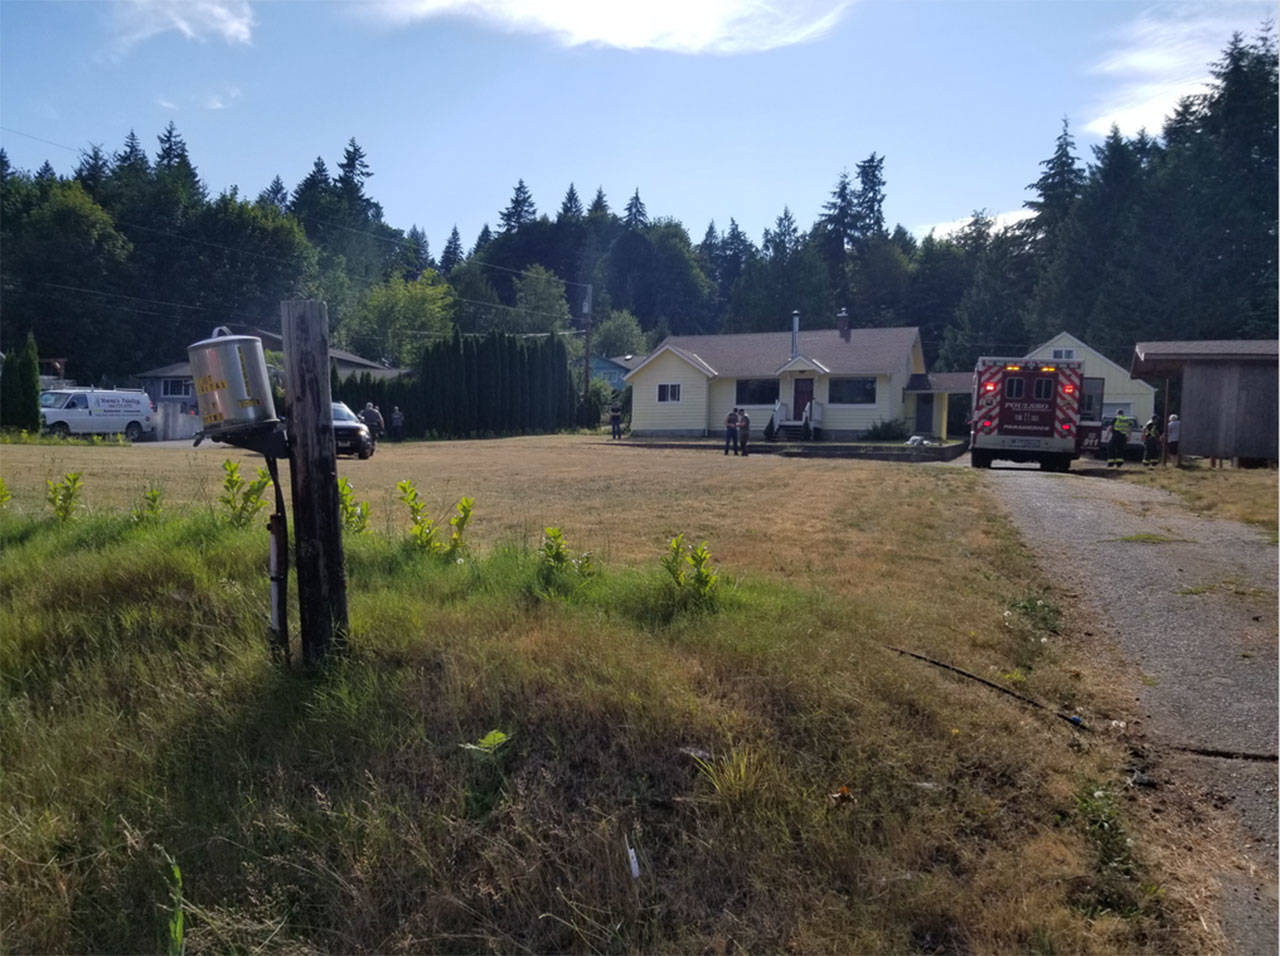 Poulsbo man who defended home could still face charges